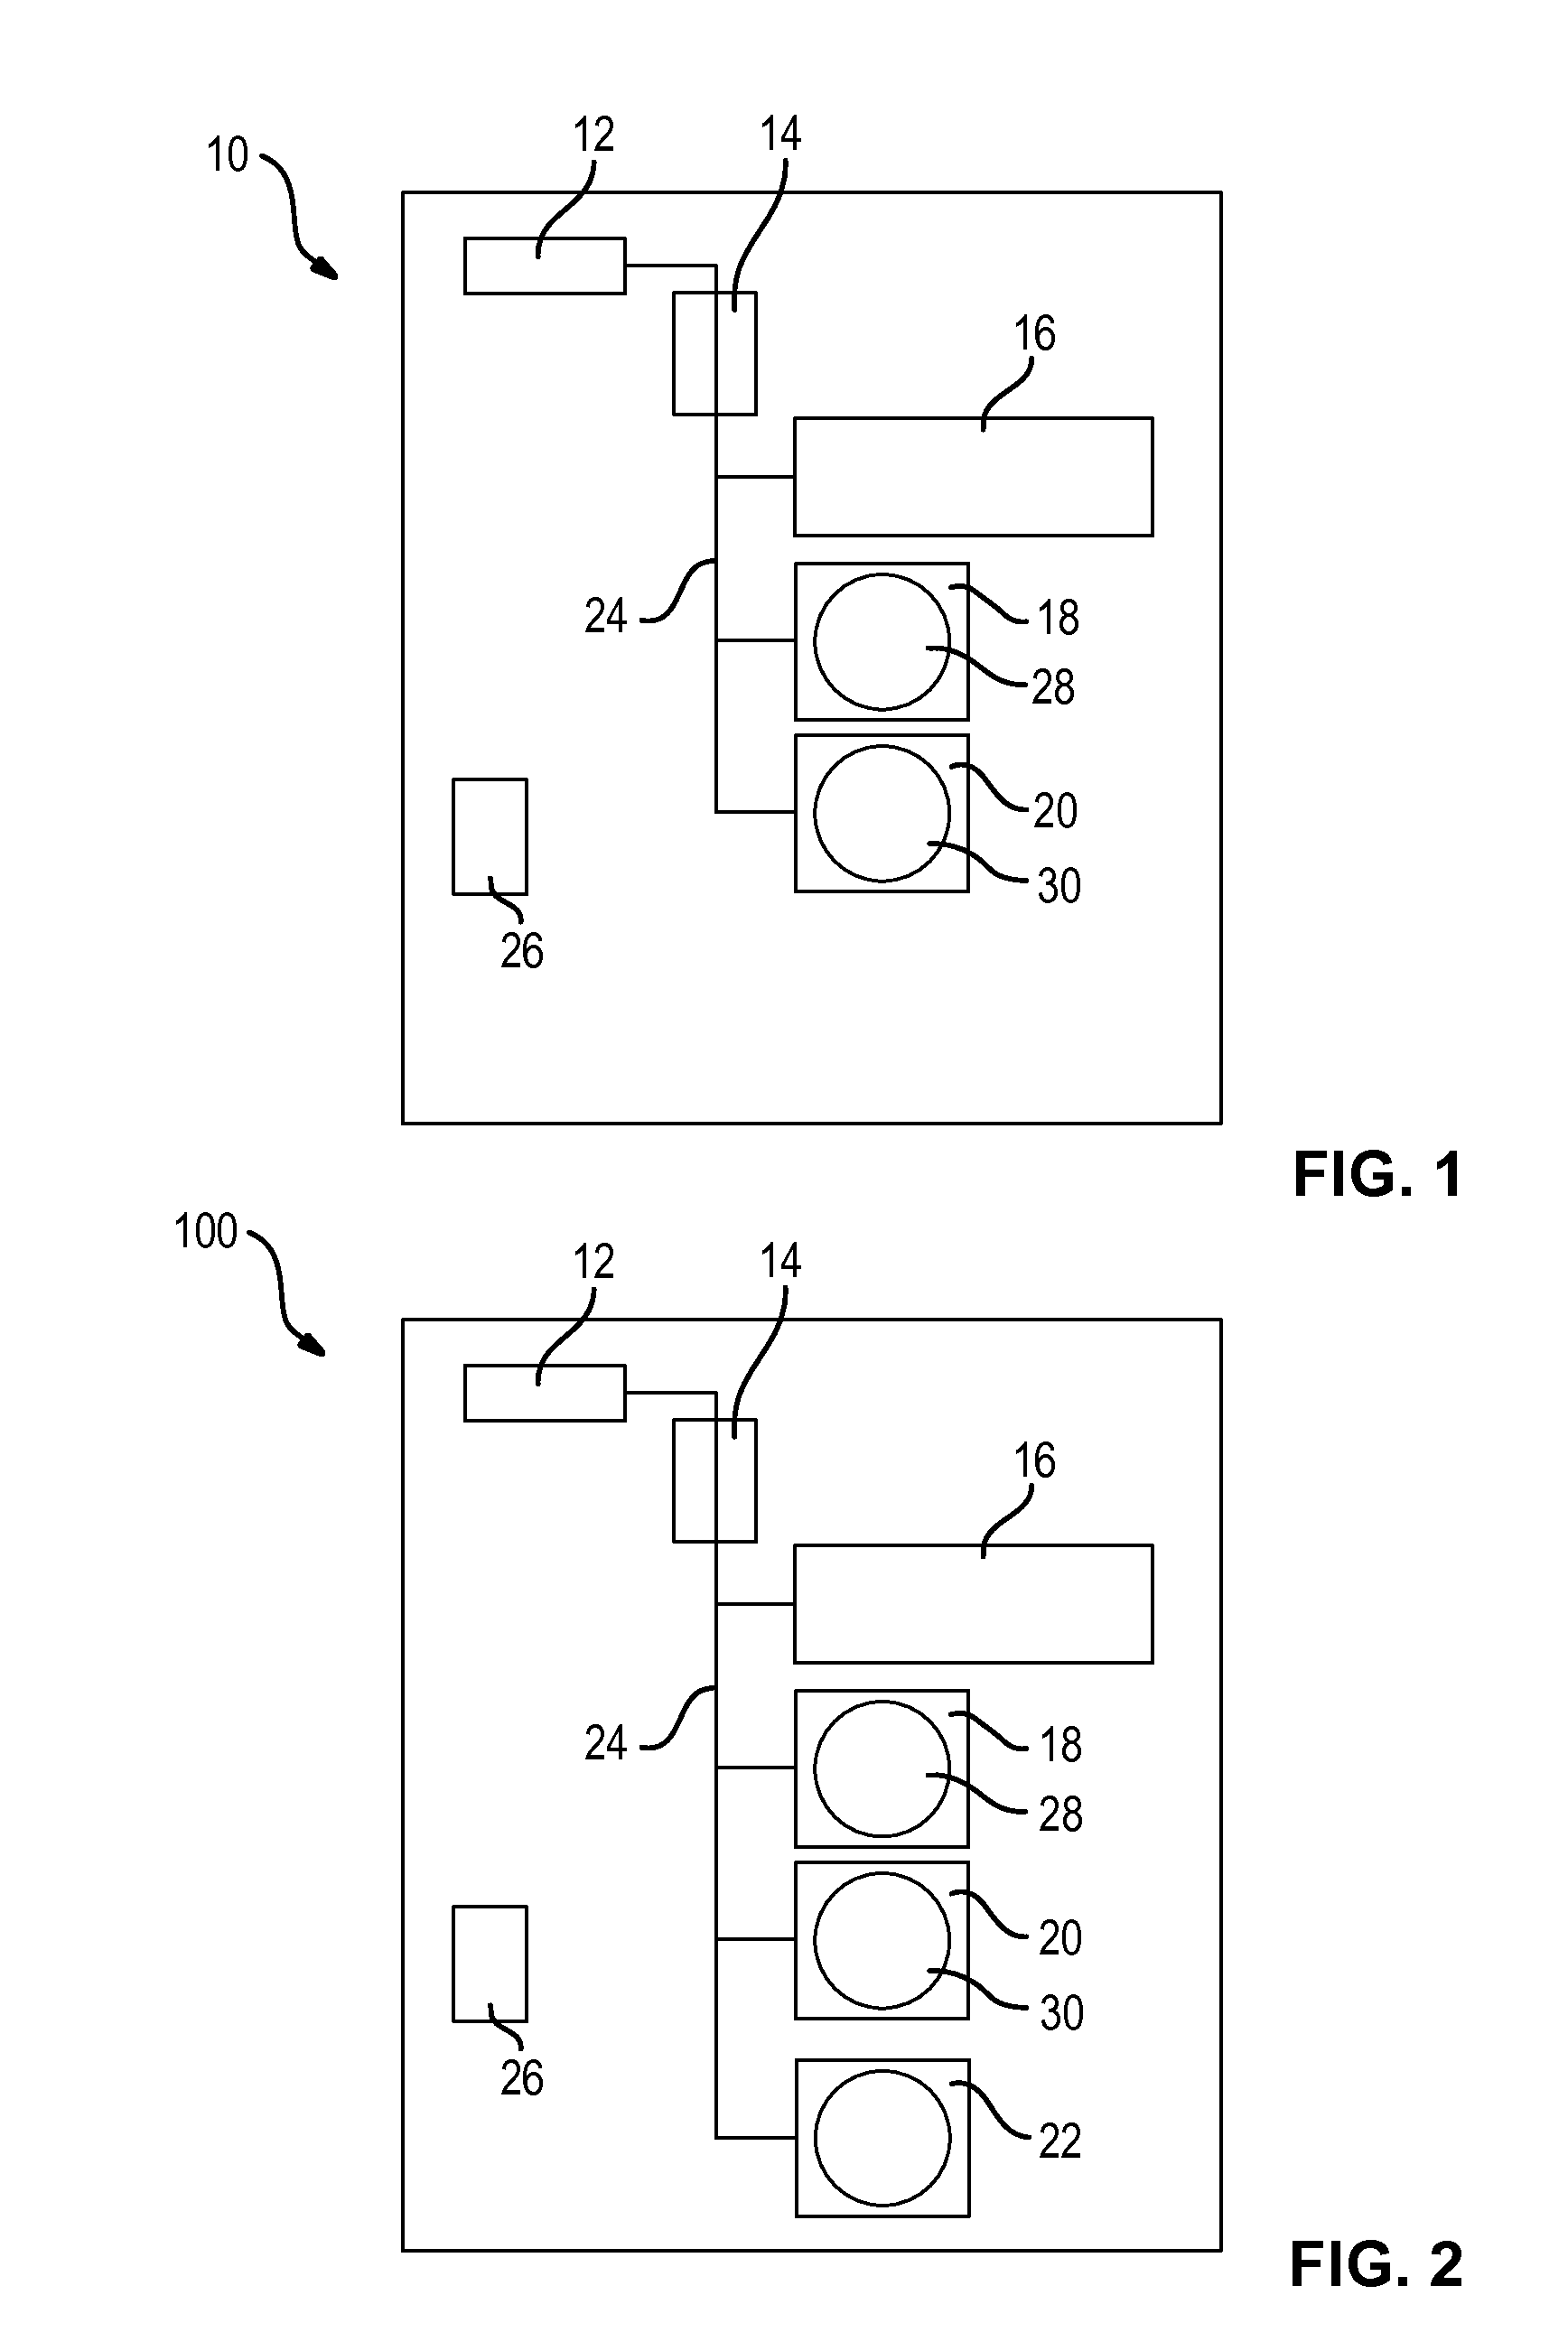 Device for handling banknotes with optimized mixed storage